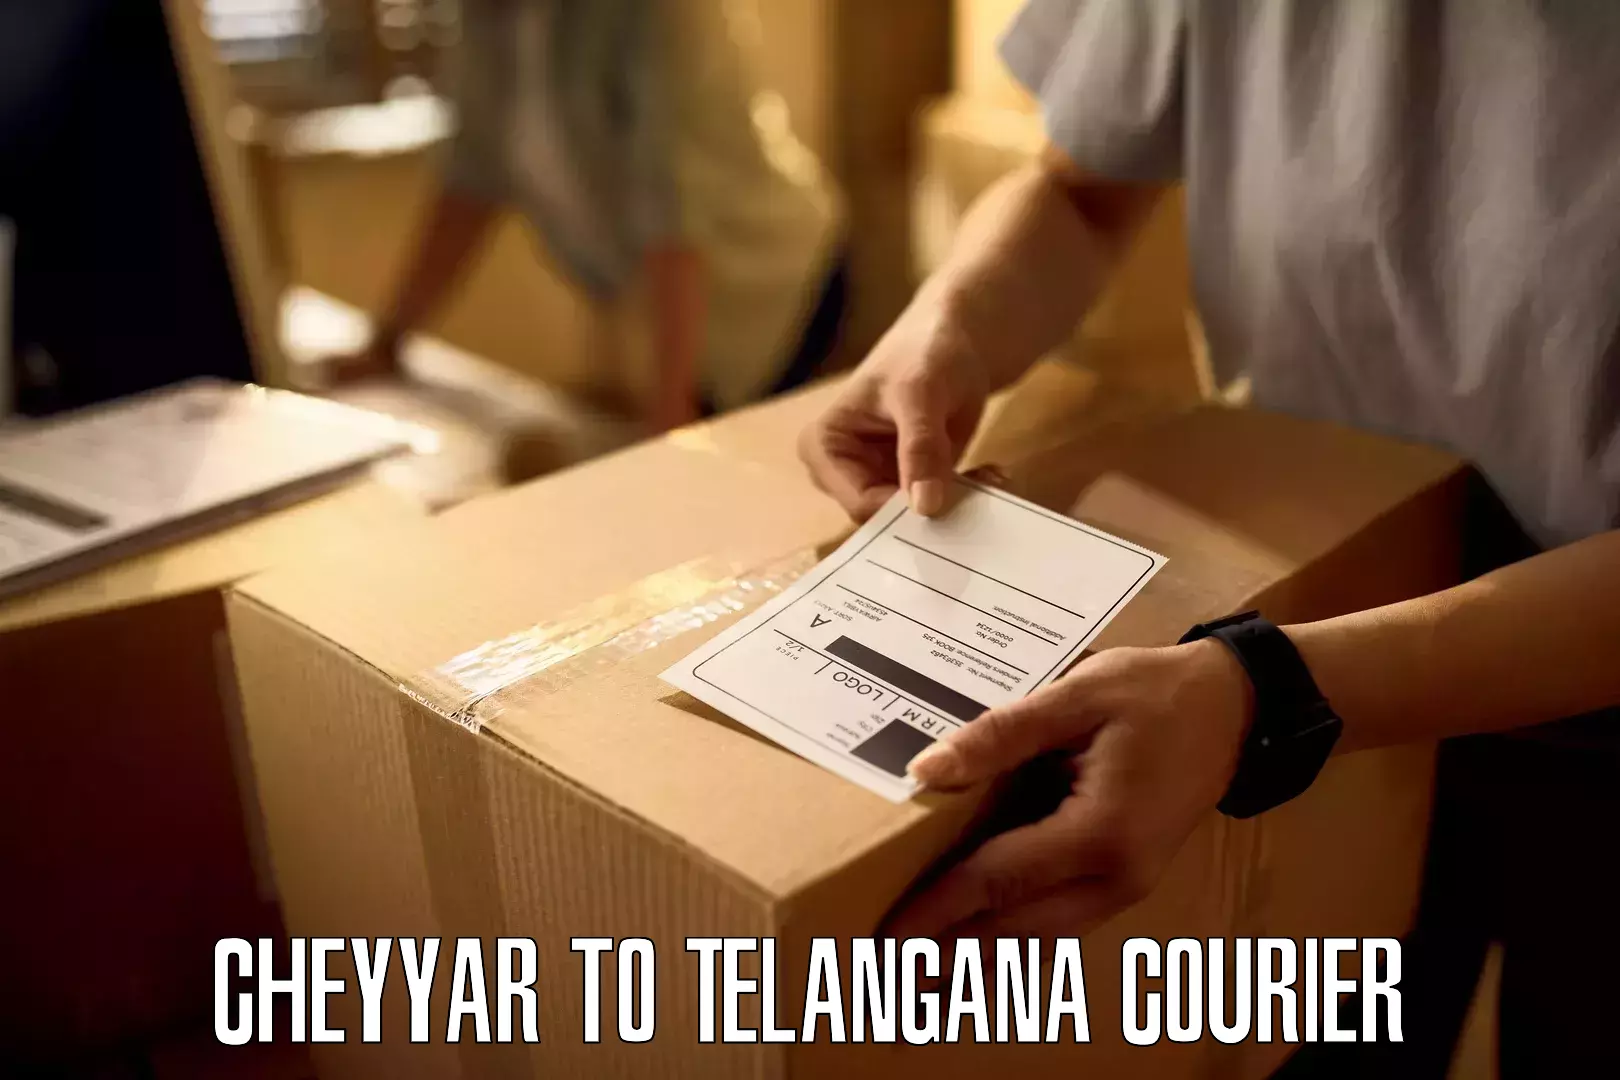 Multi-national courier services Cheyyar to Telangana